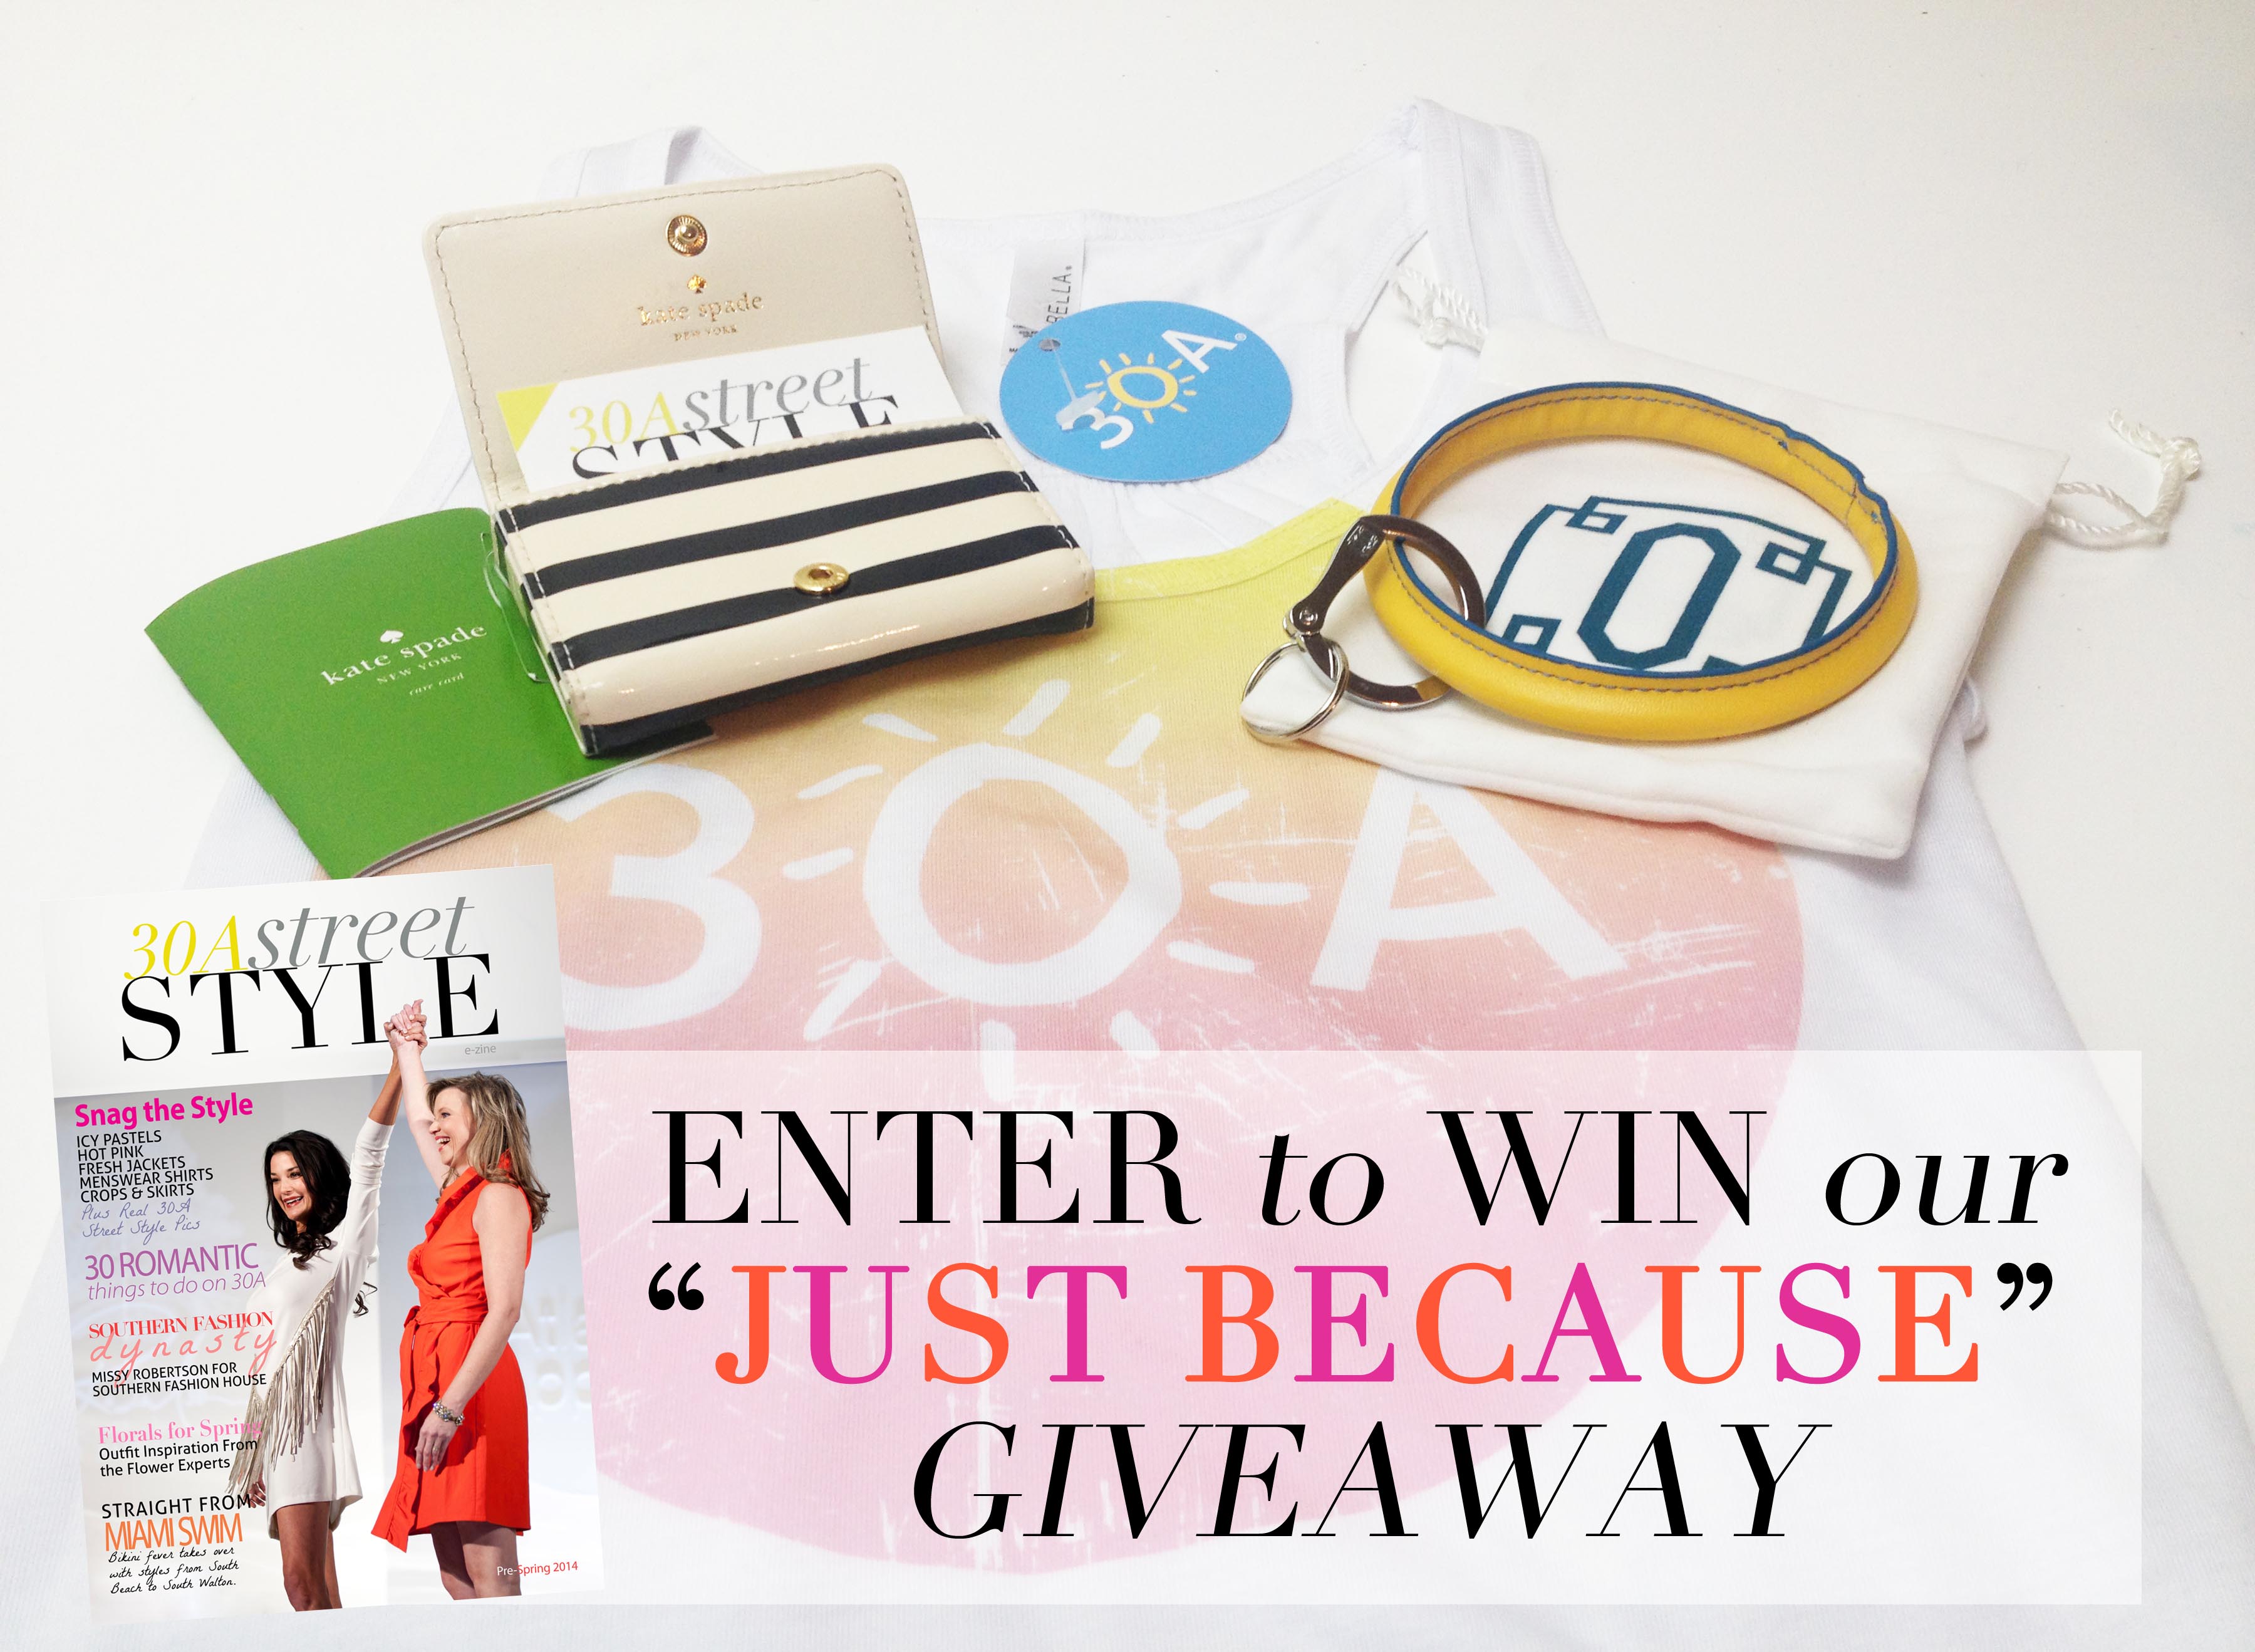 “Just Because” Giveaway